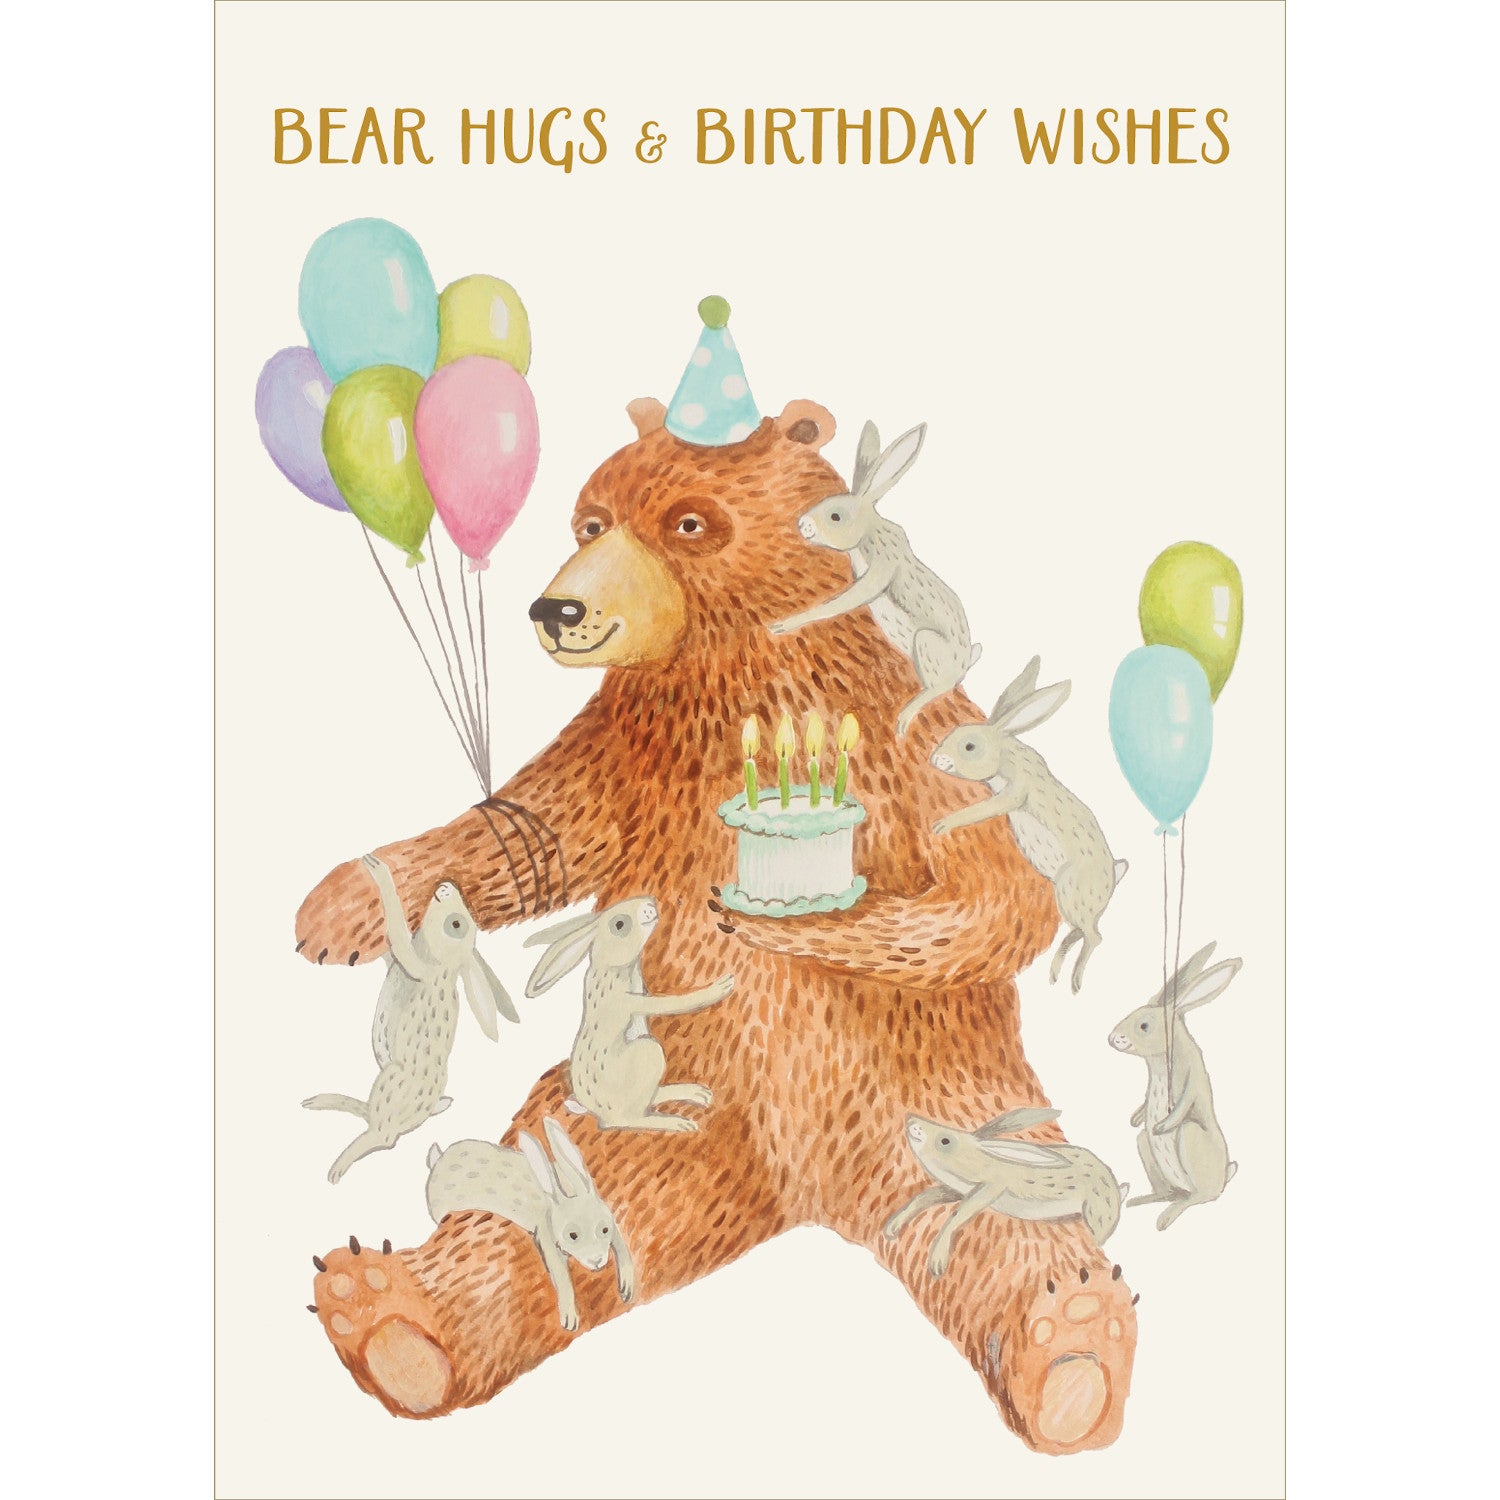 Whimsical Bear Hugs &amp; Birthday Wishes Card by Hester &amp; Cook.